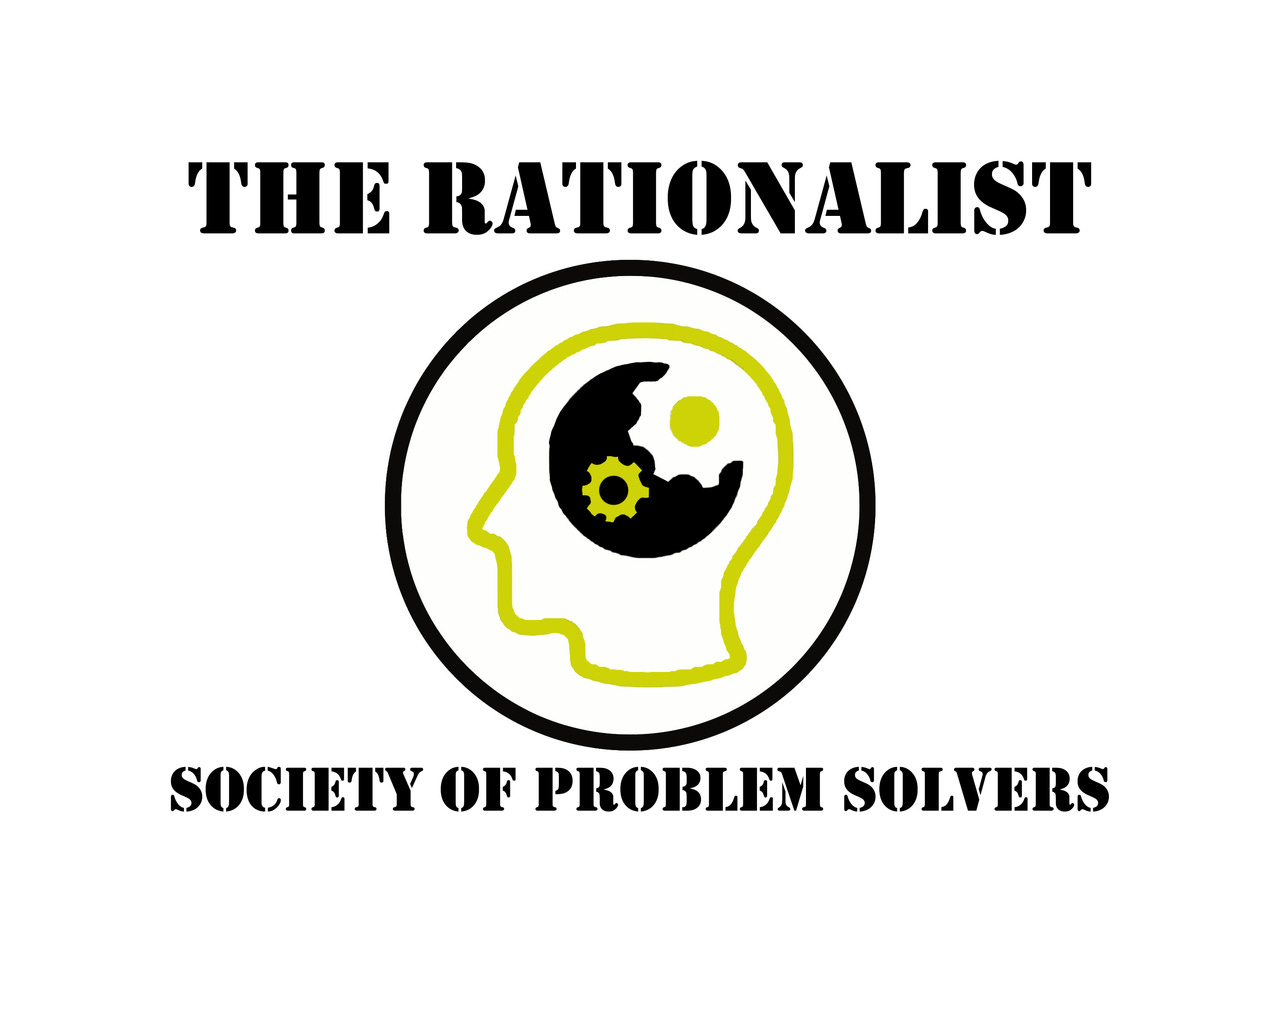 The Rationalist - Society of Problem Solvers